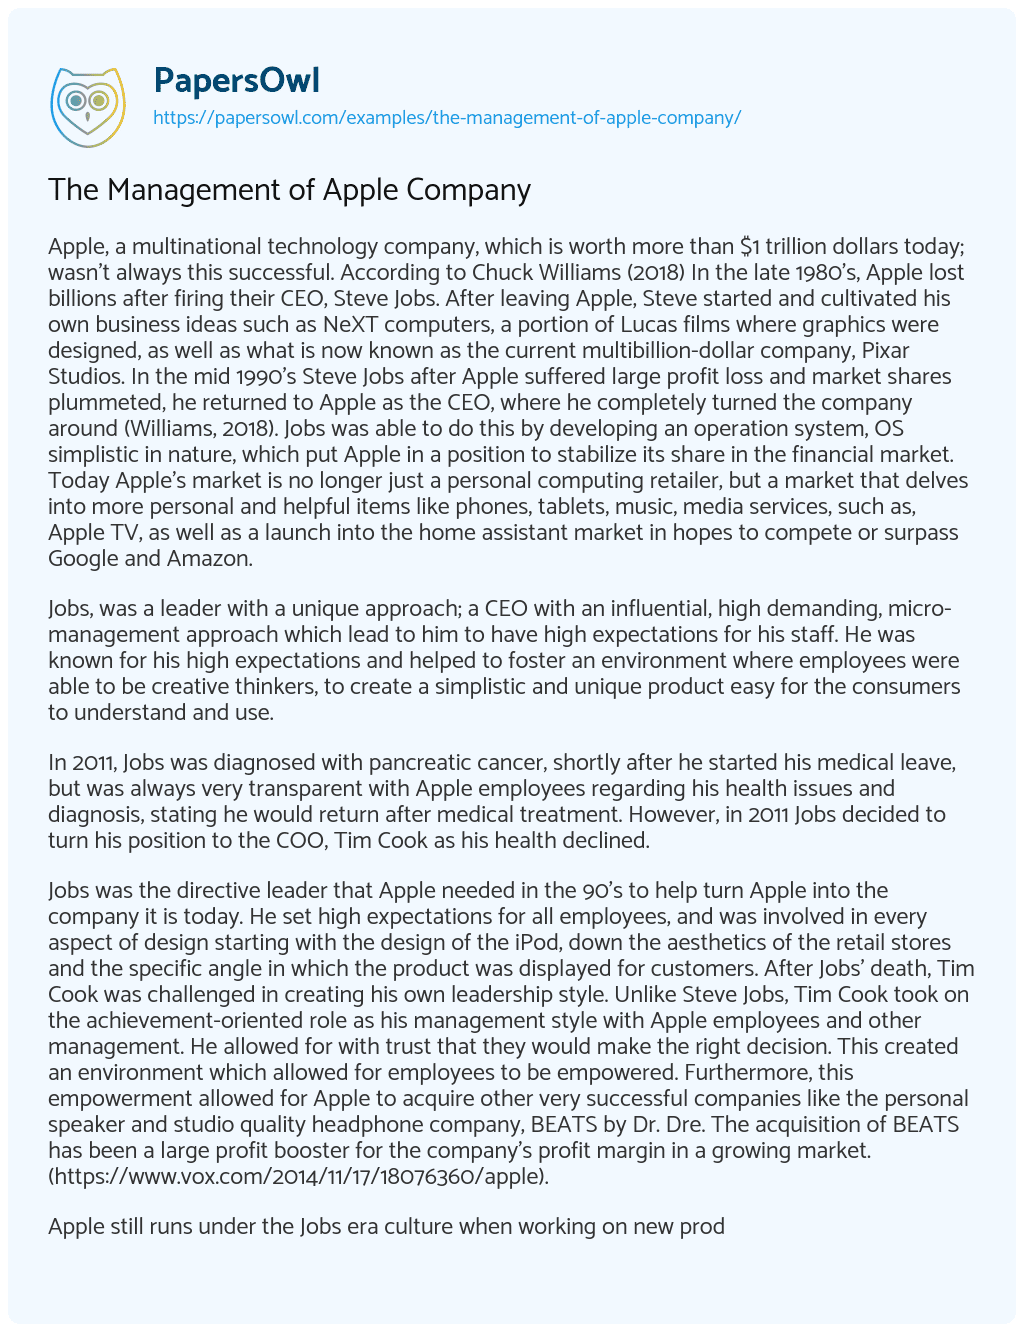 The Management of Apple Company essay